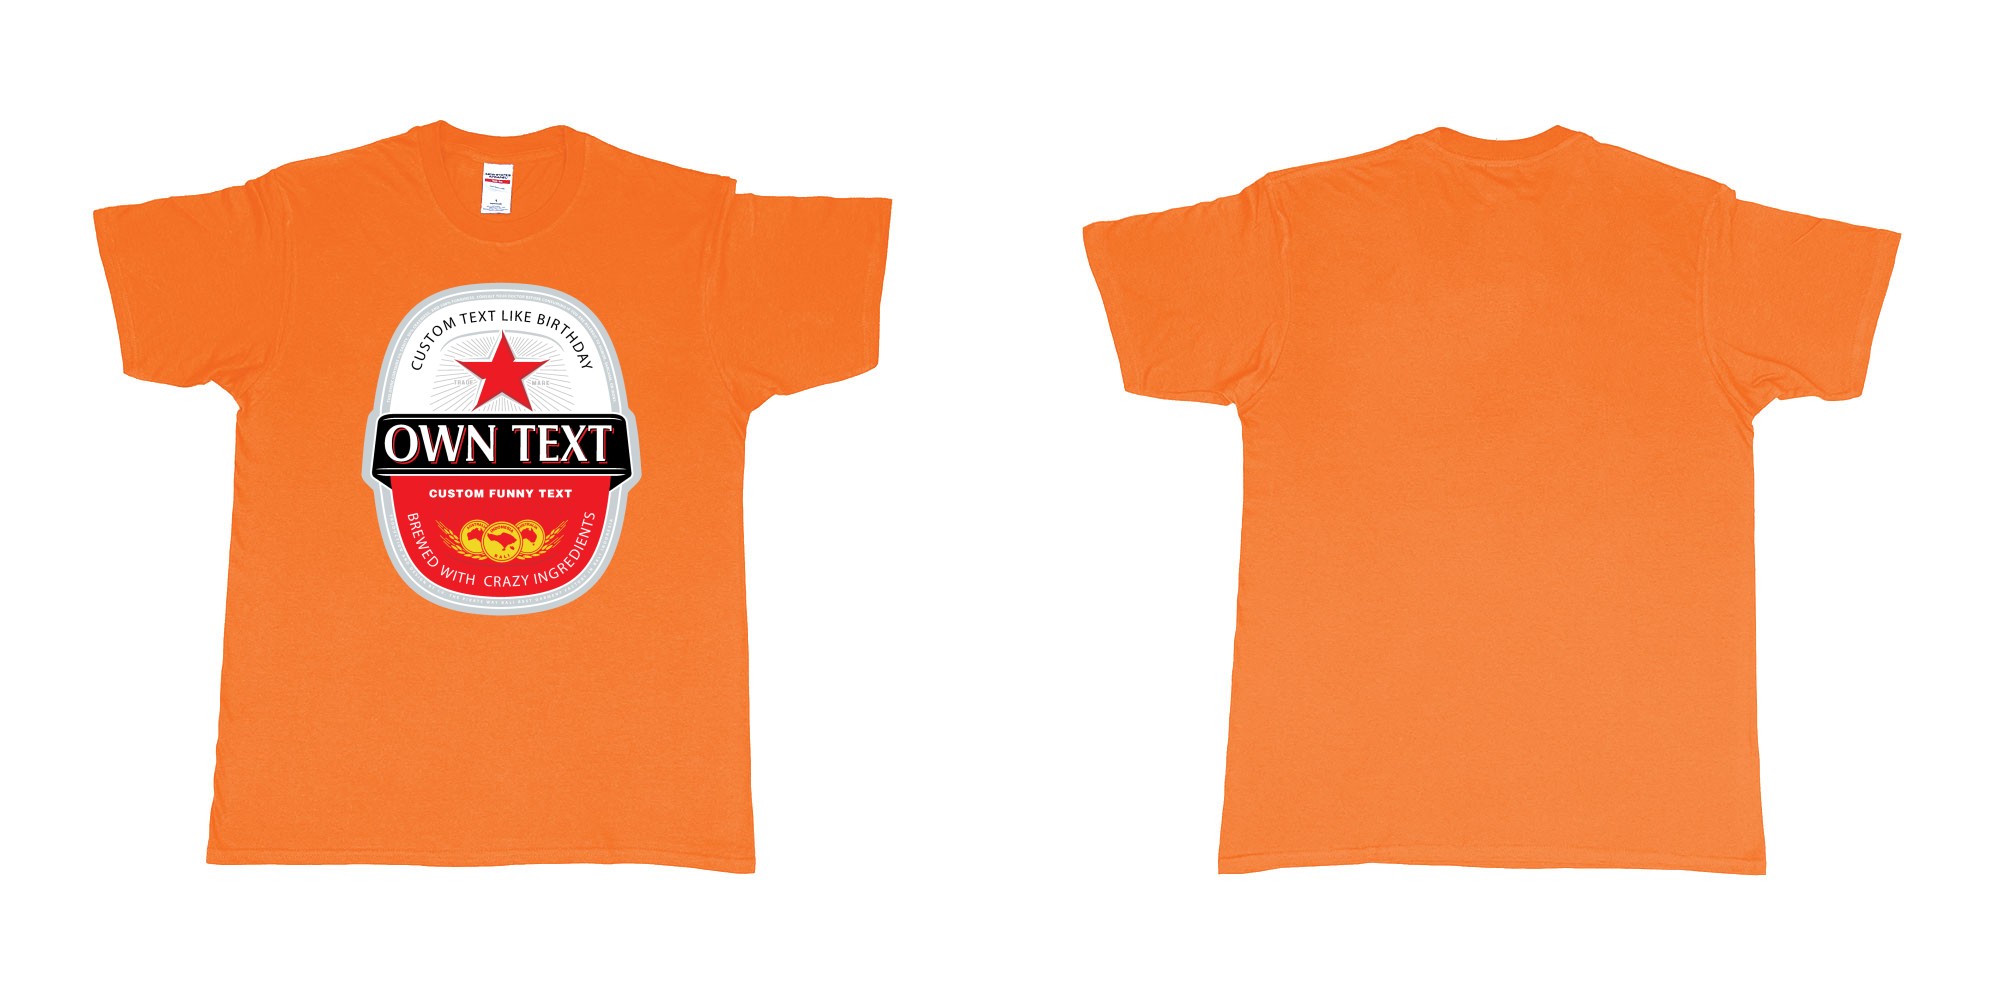 Custom tshirt design beer bintang large label in fabric color orange choice your own text made in Bali by The Pirate Way